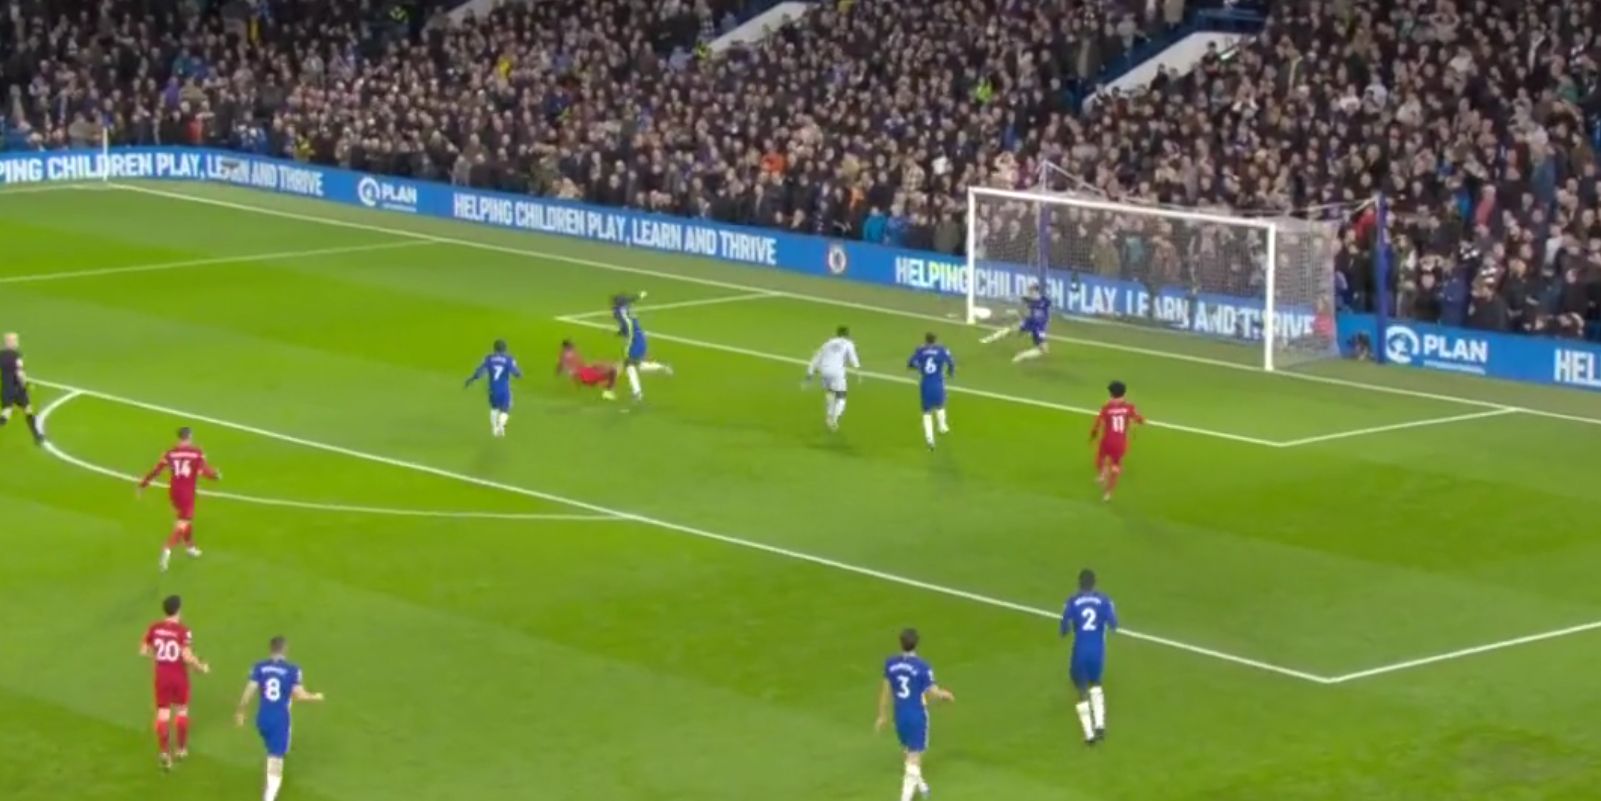 (Video) Sadio Mane capitalises on a Trevoh Chalobah mistake and takes it round Edouard Mendy to put Liverpool 1-0 up at Stamford Bridge